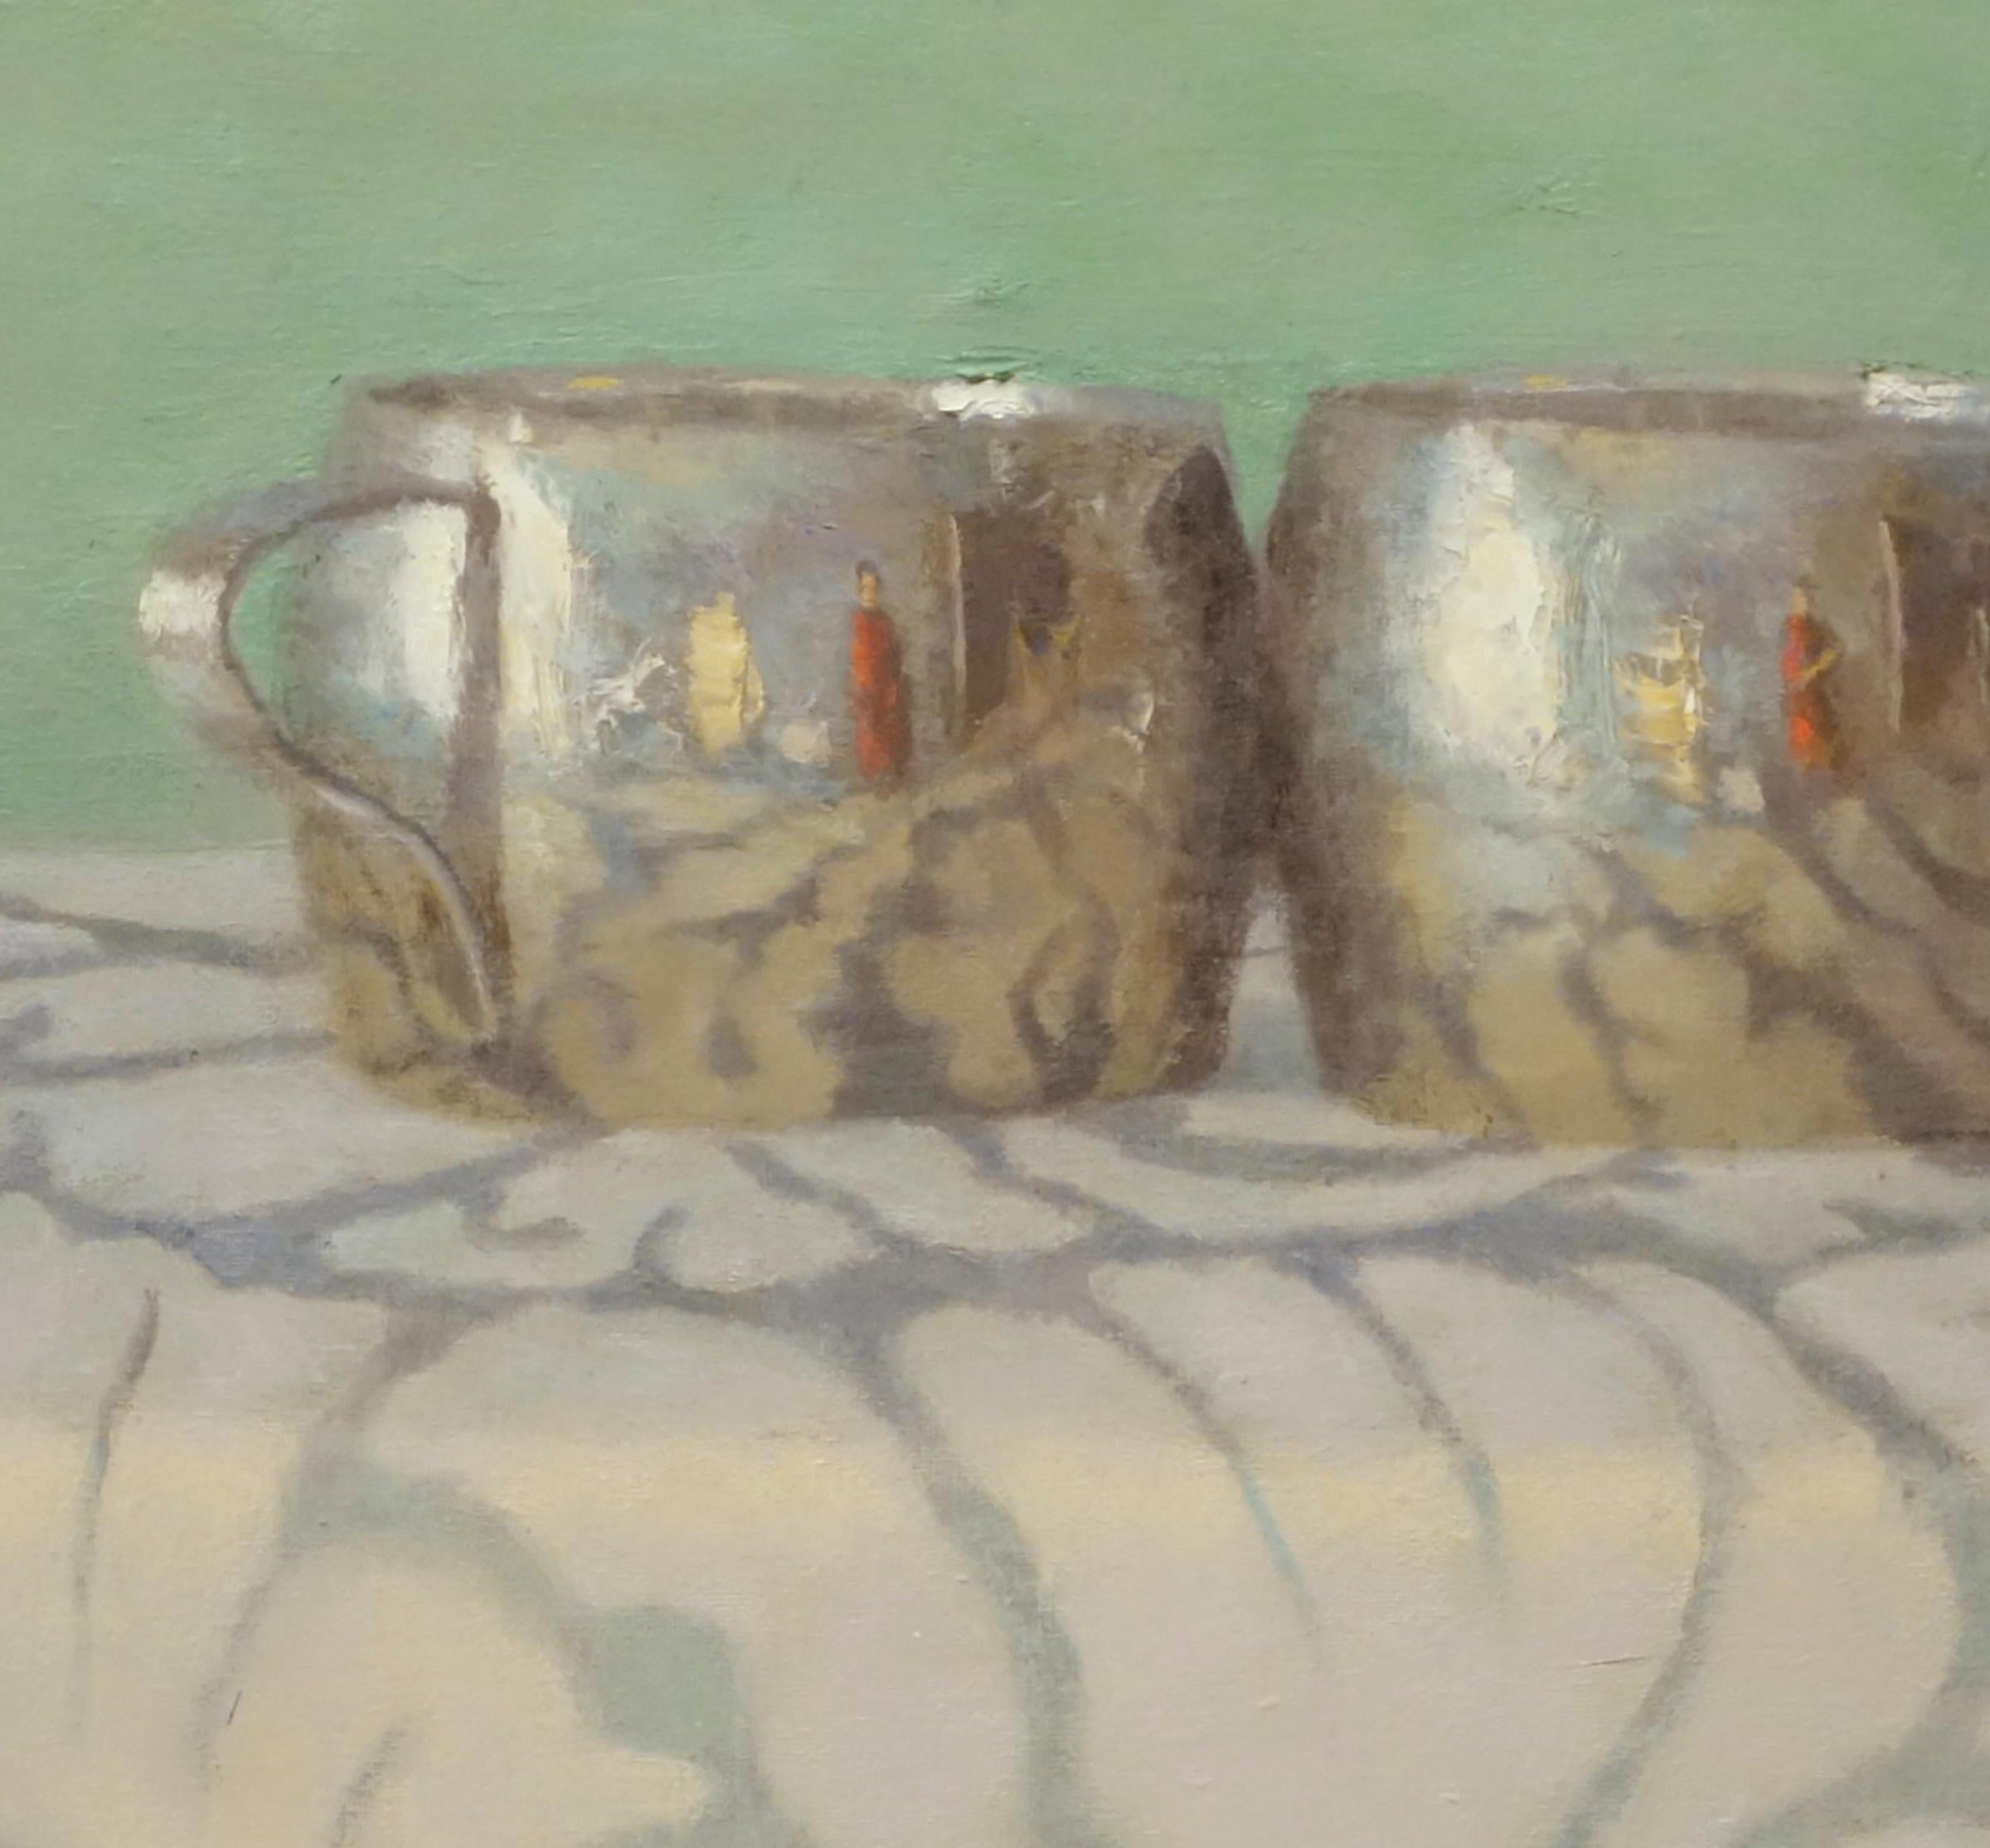 SILVER CUPS ON PATTERNED CLOTH, patterned cloth, still-life, metal cups 1